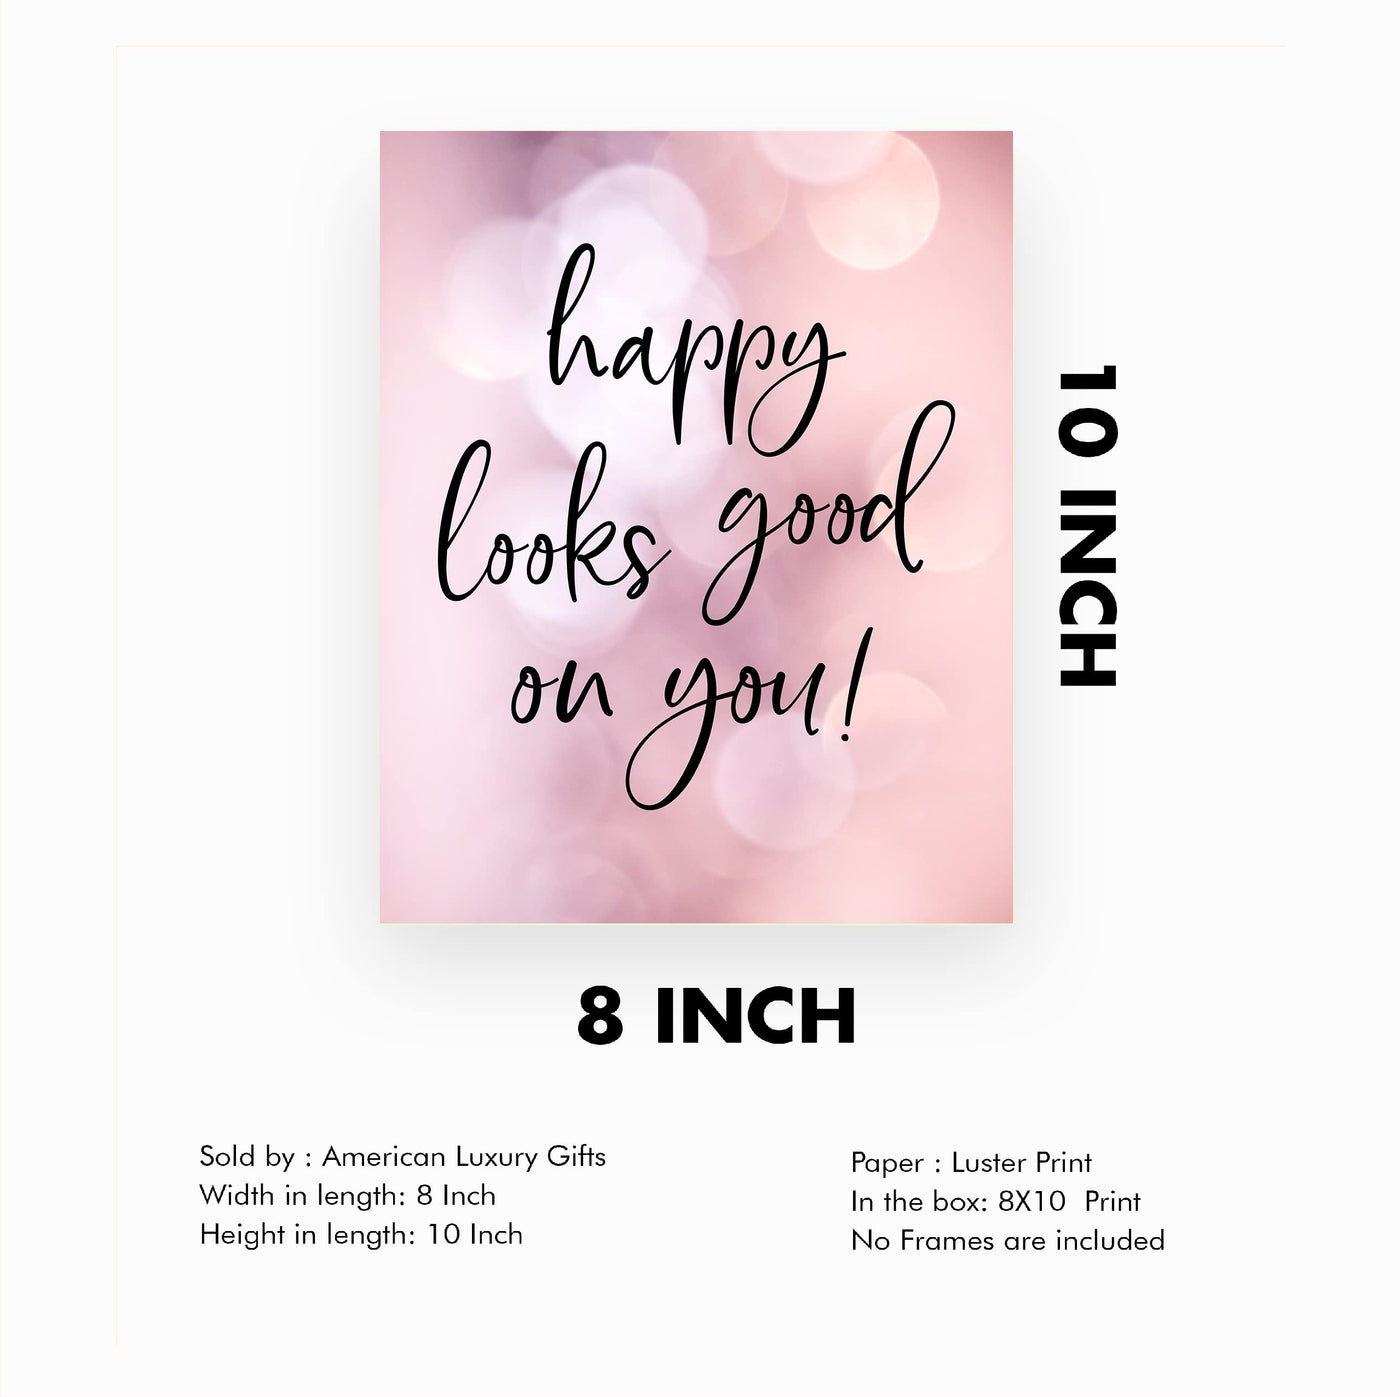 Happy Looks Good On You!- Inspirational Quotes Wall Art -8 x 10" Pink Motivational Wall Print -Ready to Frame. Modern Typographic Decor for Home-Office-School-Store. Positive Gift for Happiness!